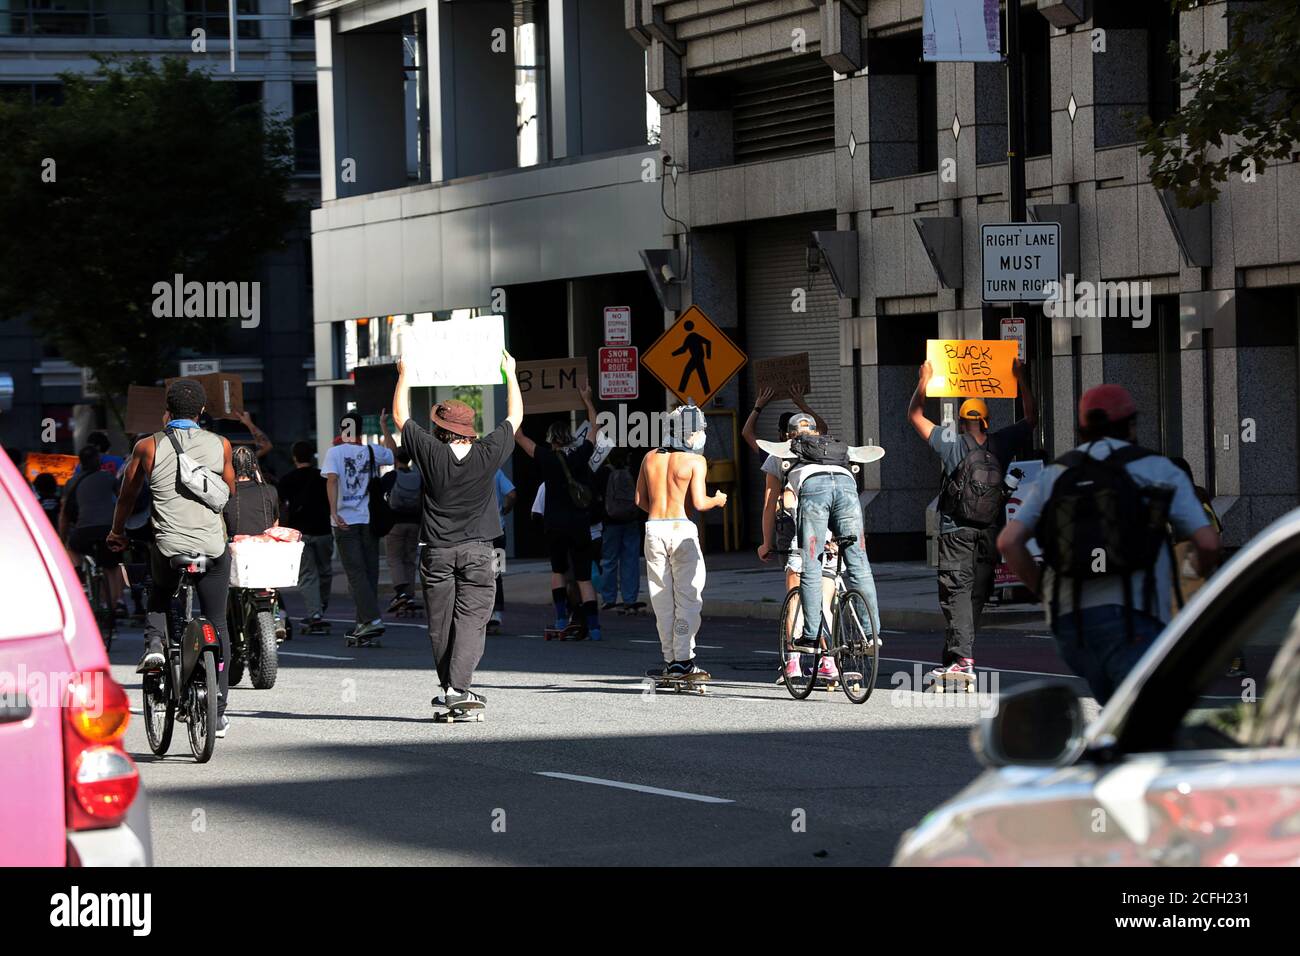 Protesters block traffic riding skateboards and bicycles downtown in Washington, U.S., September 5, 2020. REUTERS/Cheriss May Stock Photo